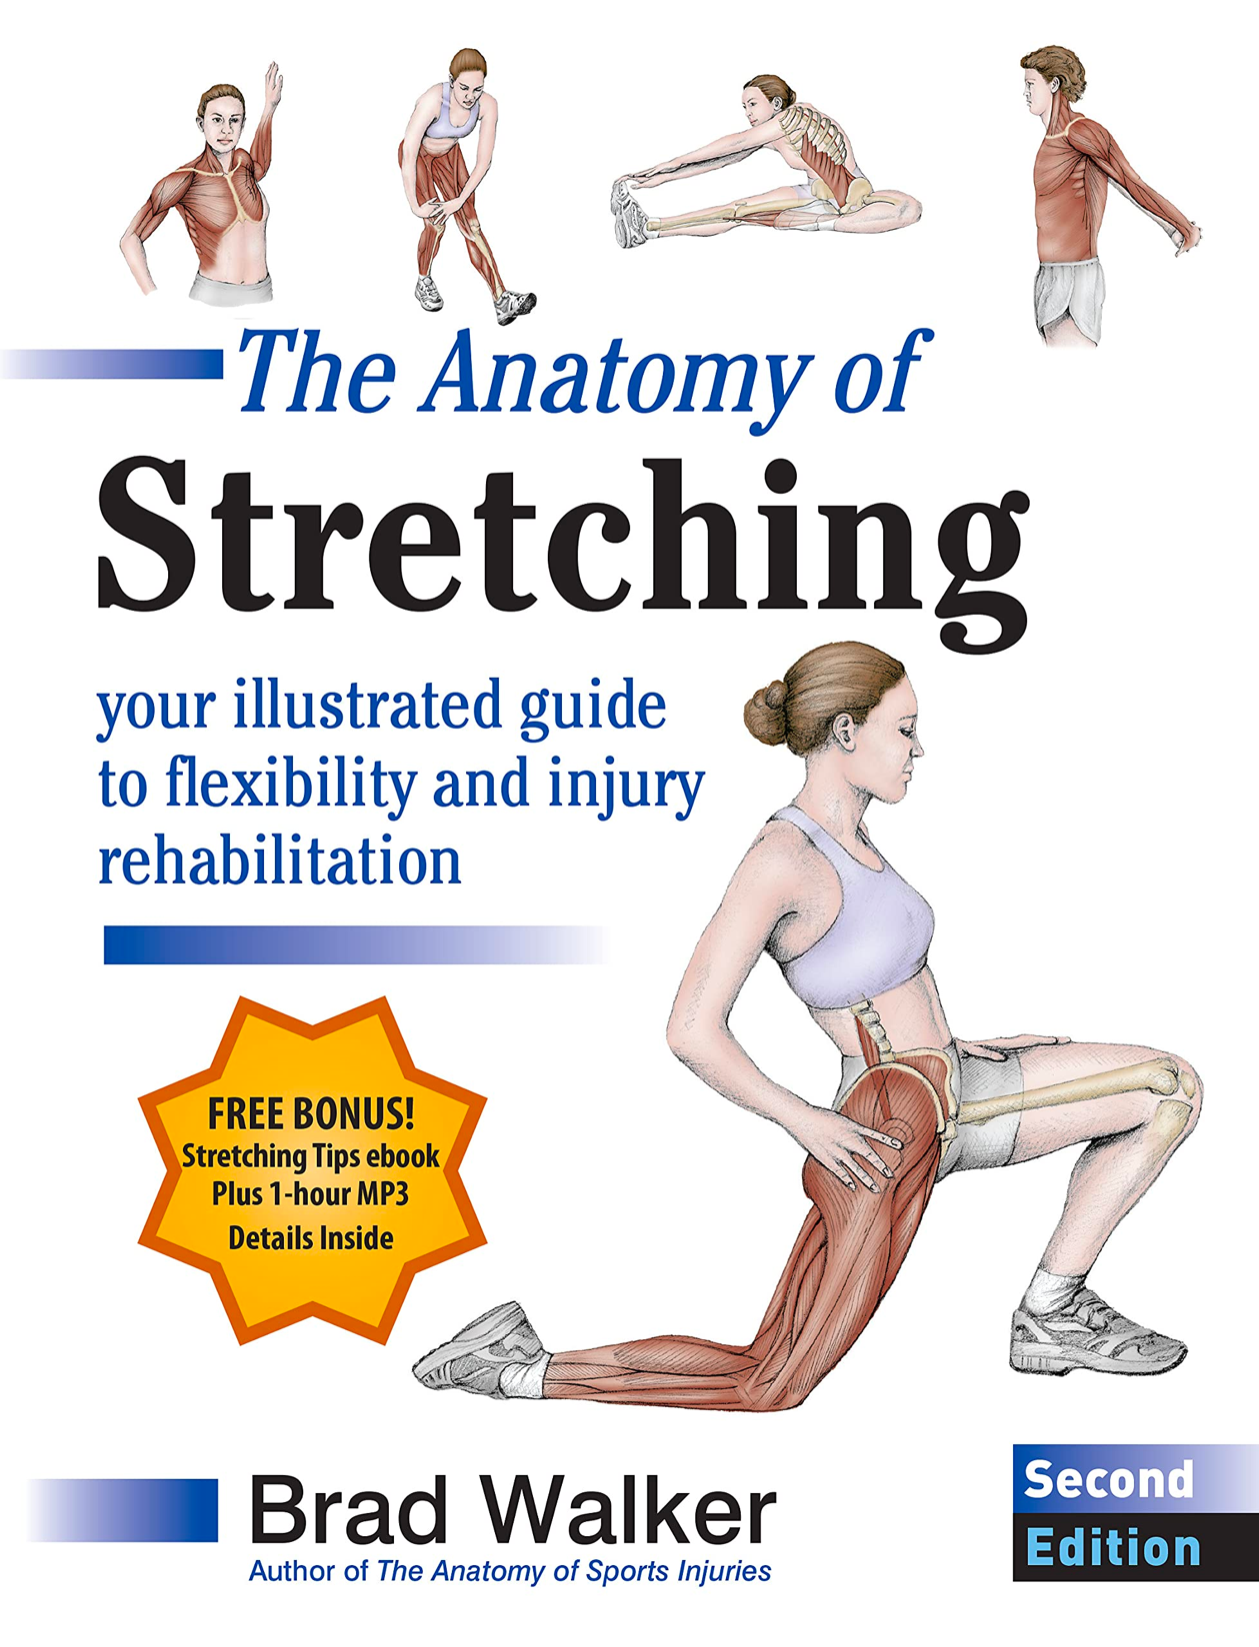 The Anatomy of Stretching by Brad Walker